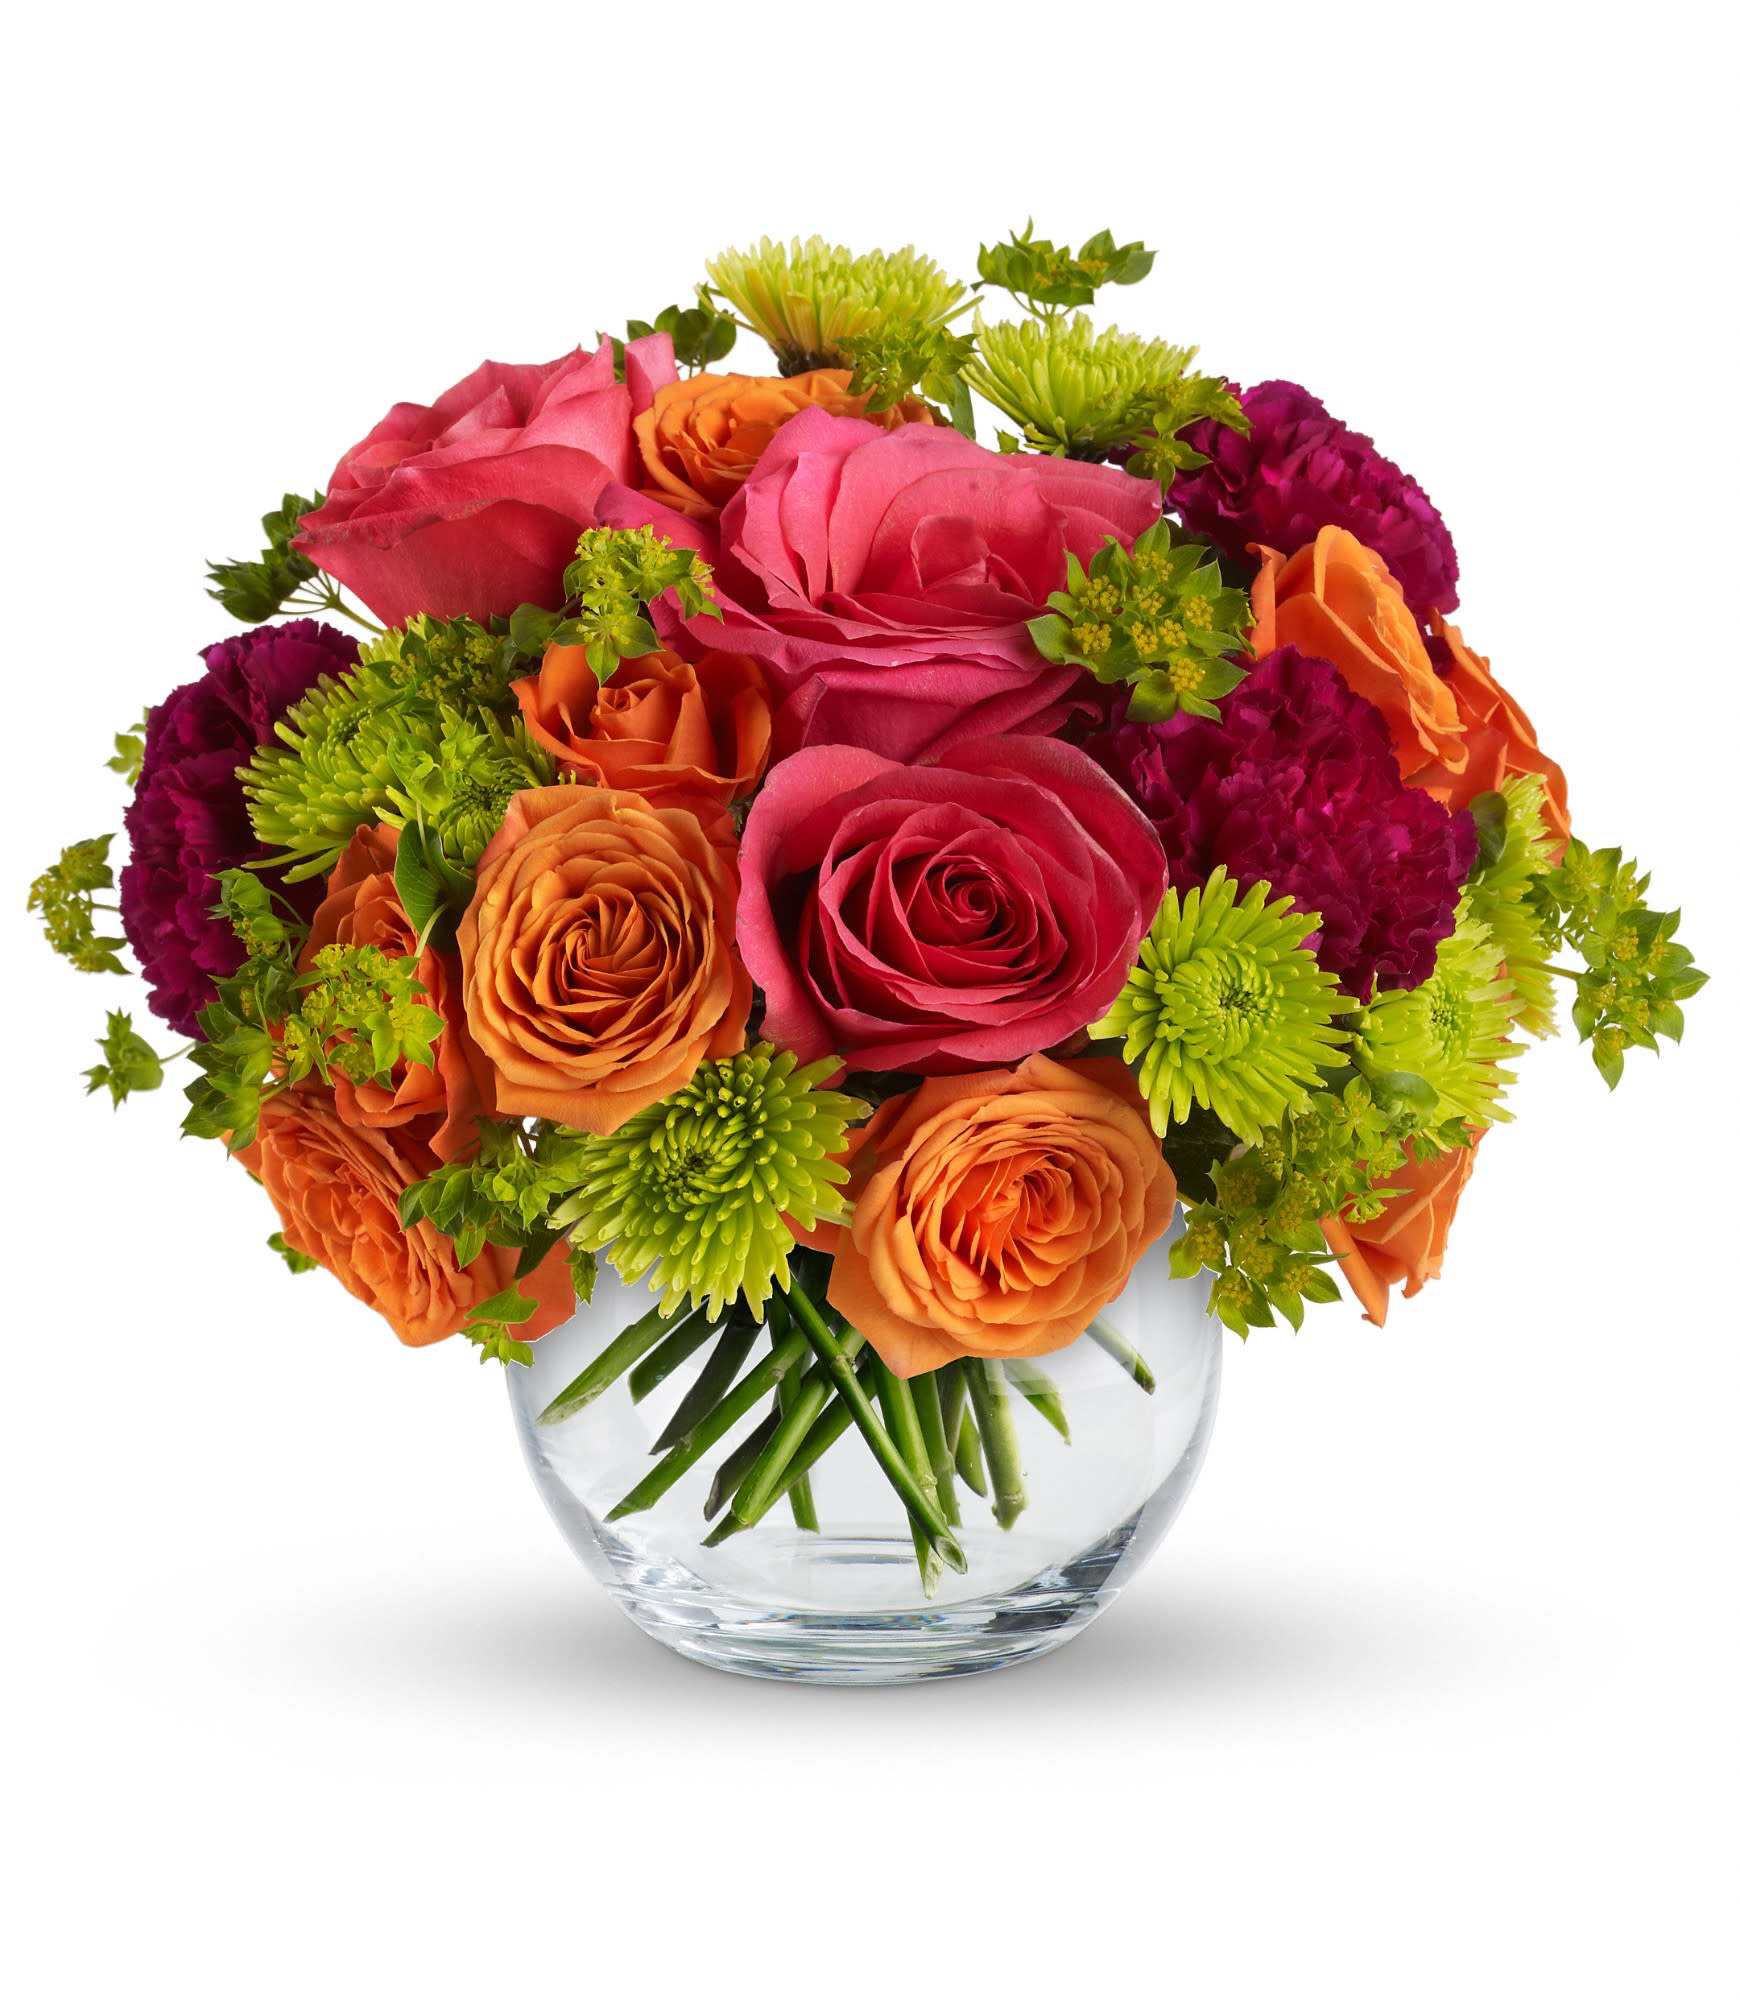 Teleflora's Smile for Me - Rekindle warm feelings with this sweet but sizzling array of hot pink roses, orange spray roses, purple carnations and more in a sparkling glass bubble bowl. A gorgeous gift of love for an anniversary or any romantic occasion. Expect kisses. 